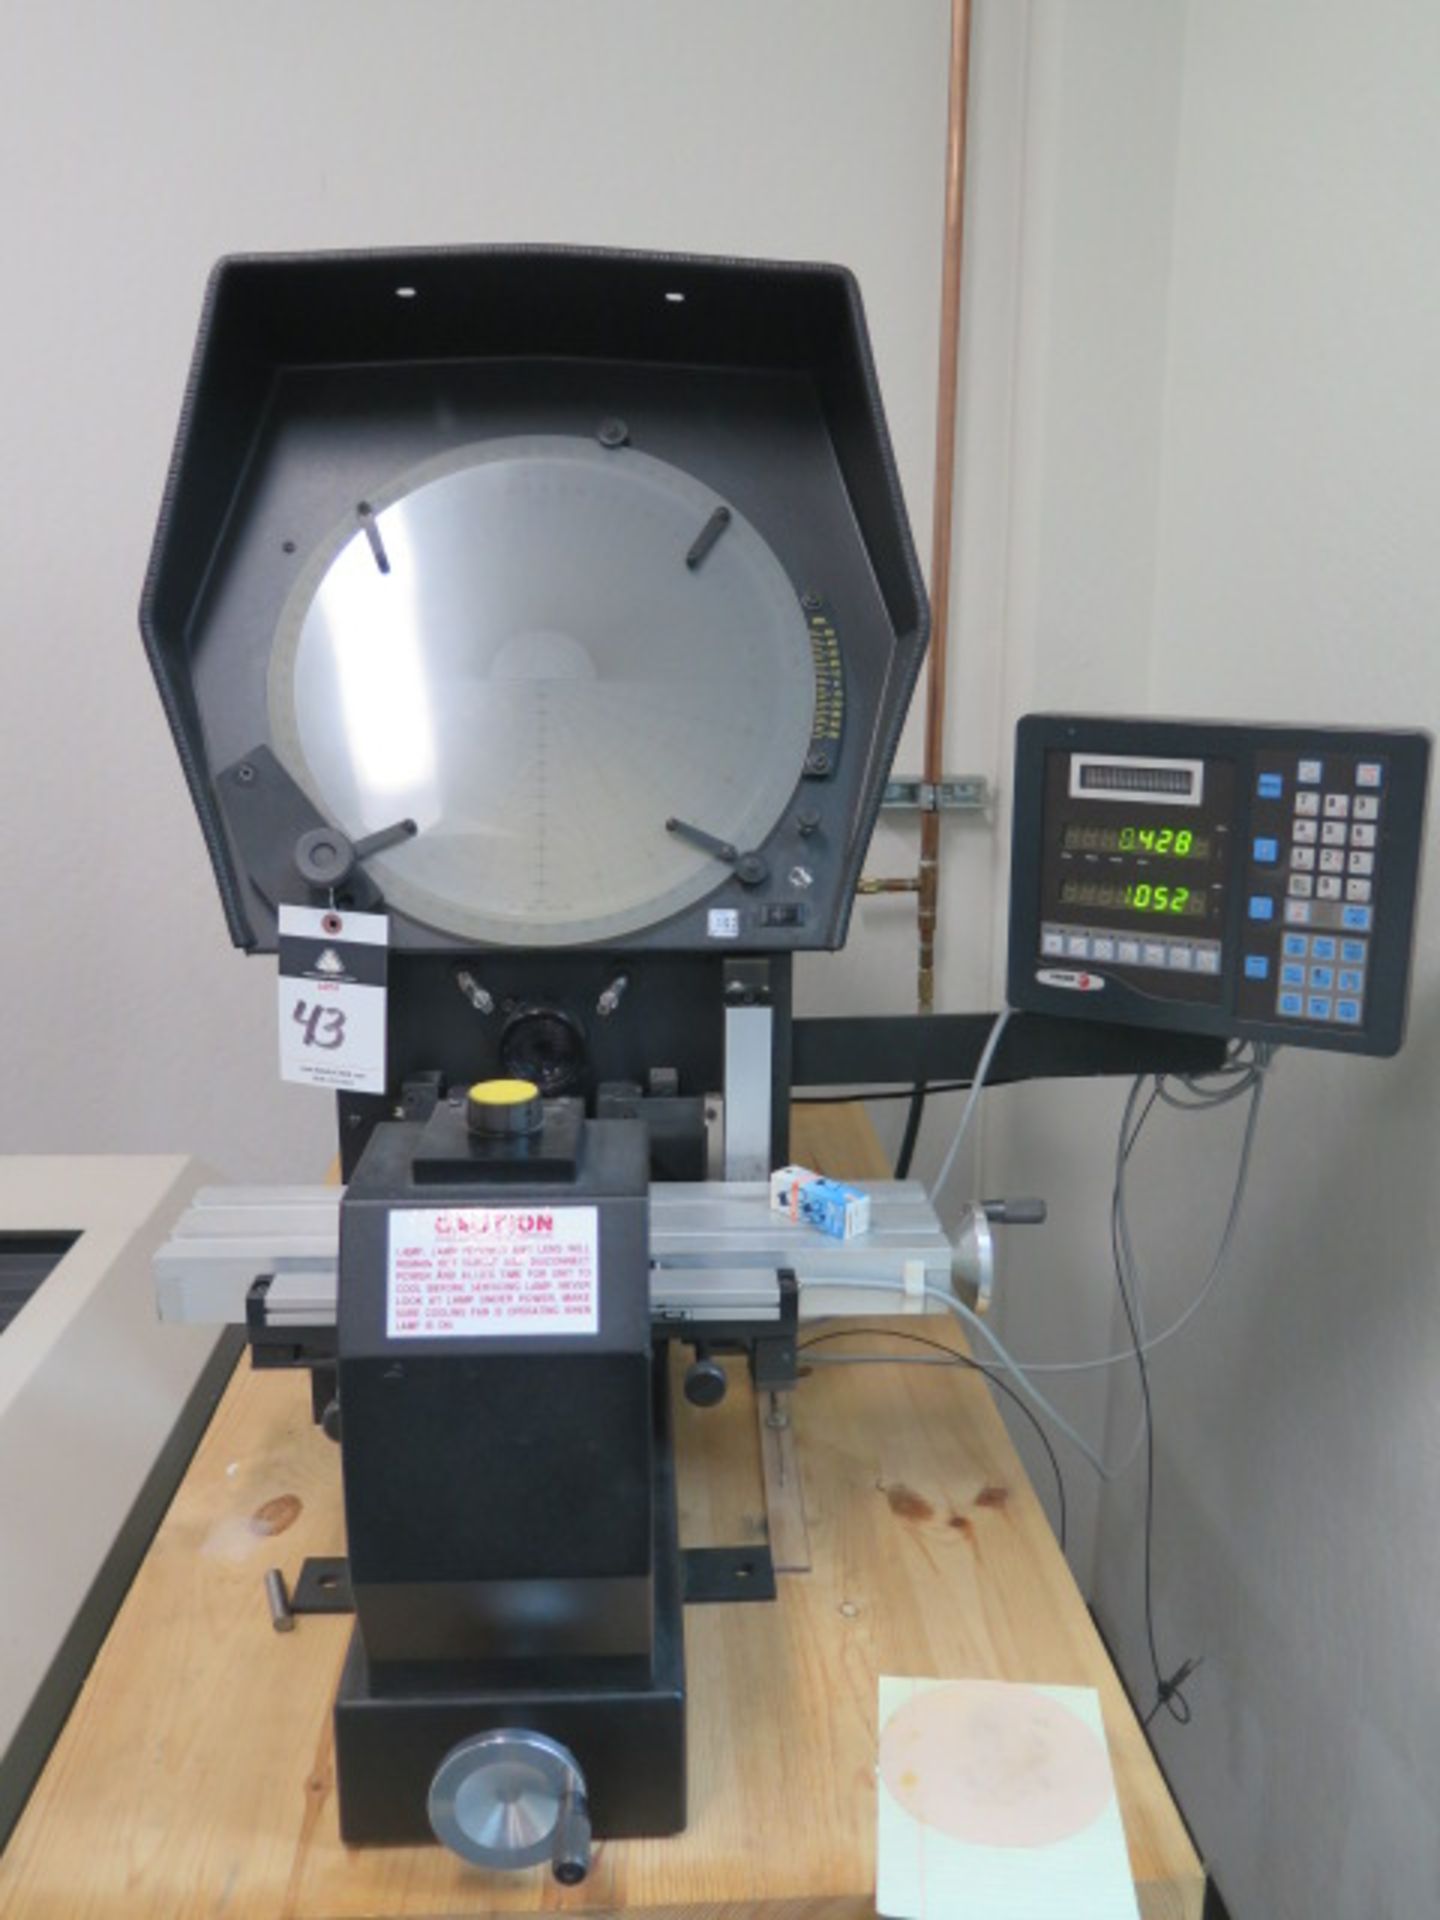 Suburban “Master View” mdl. MV14D 14” Optical Comparator s/n 3018-0903F w/ Fagor Programmable DRO,